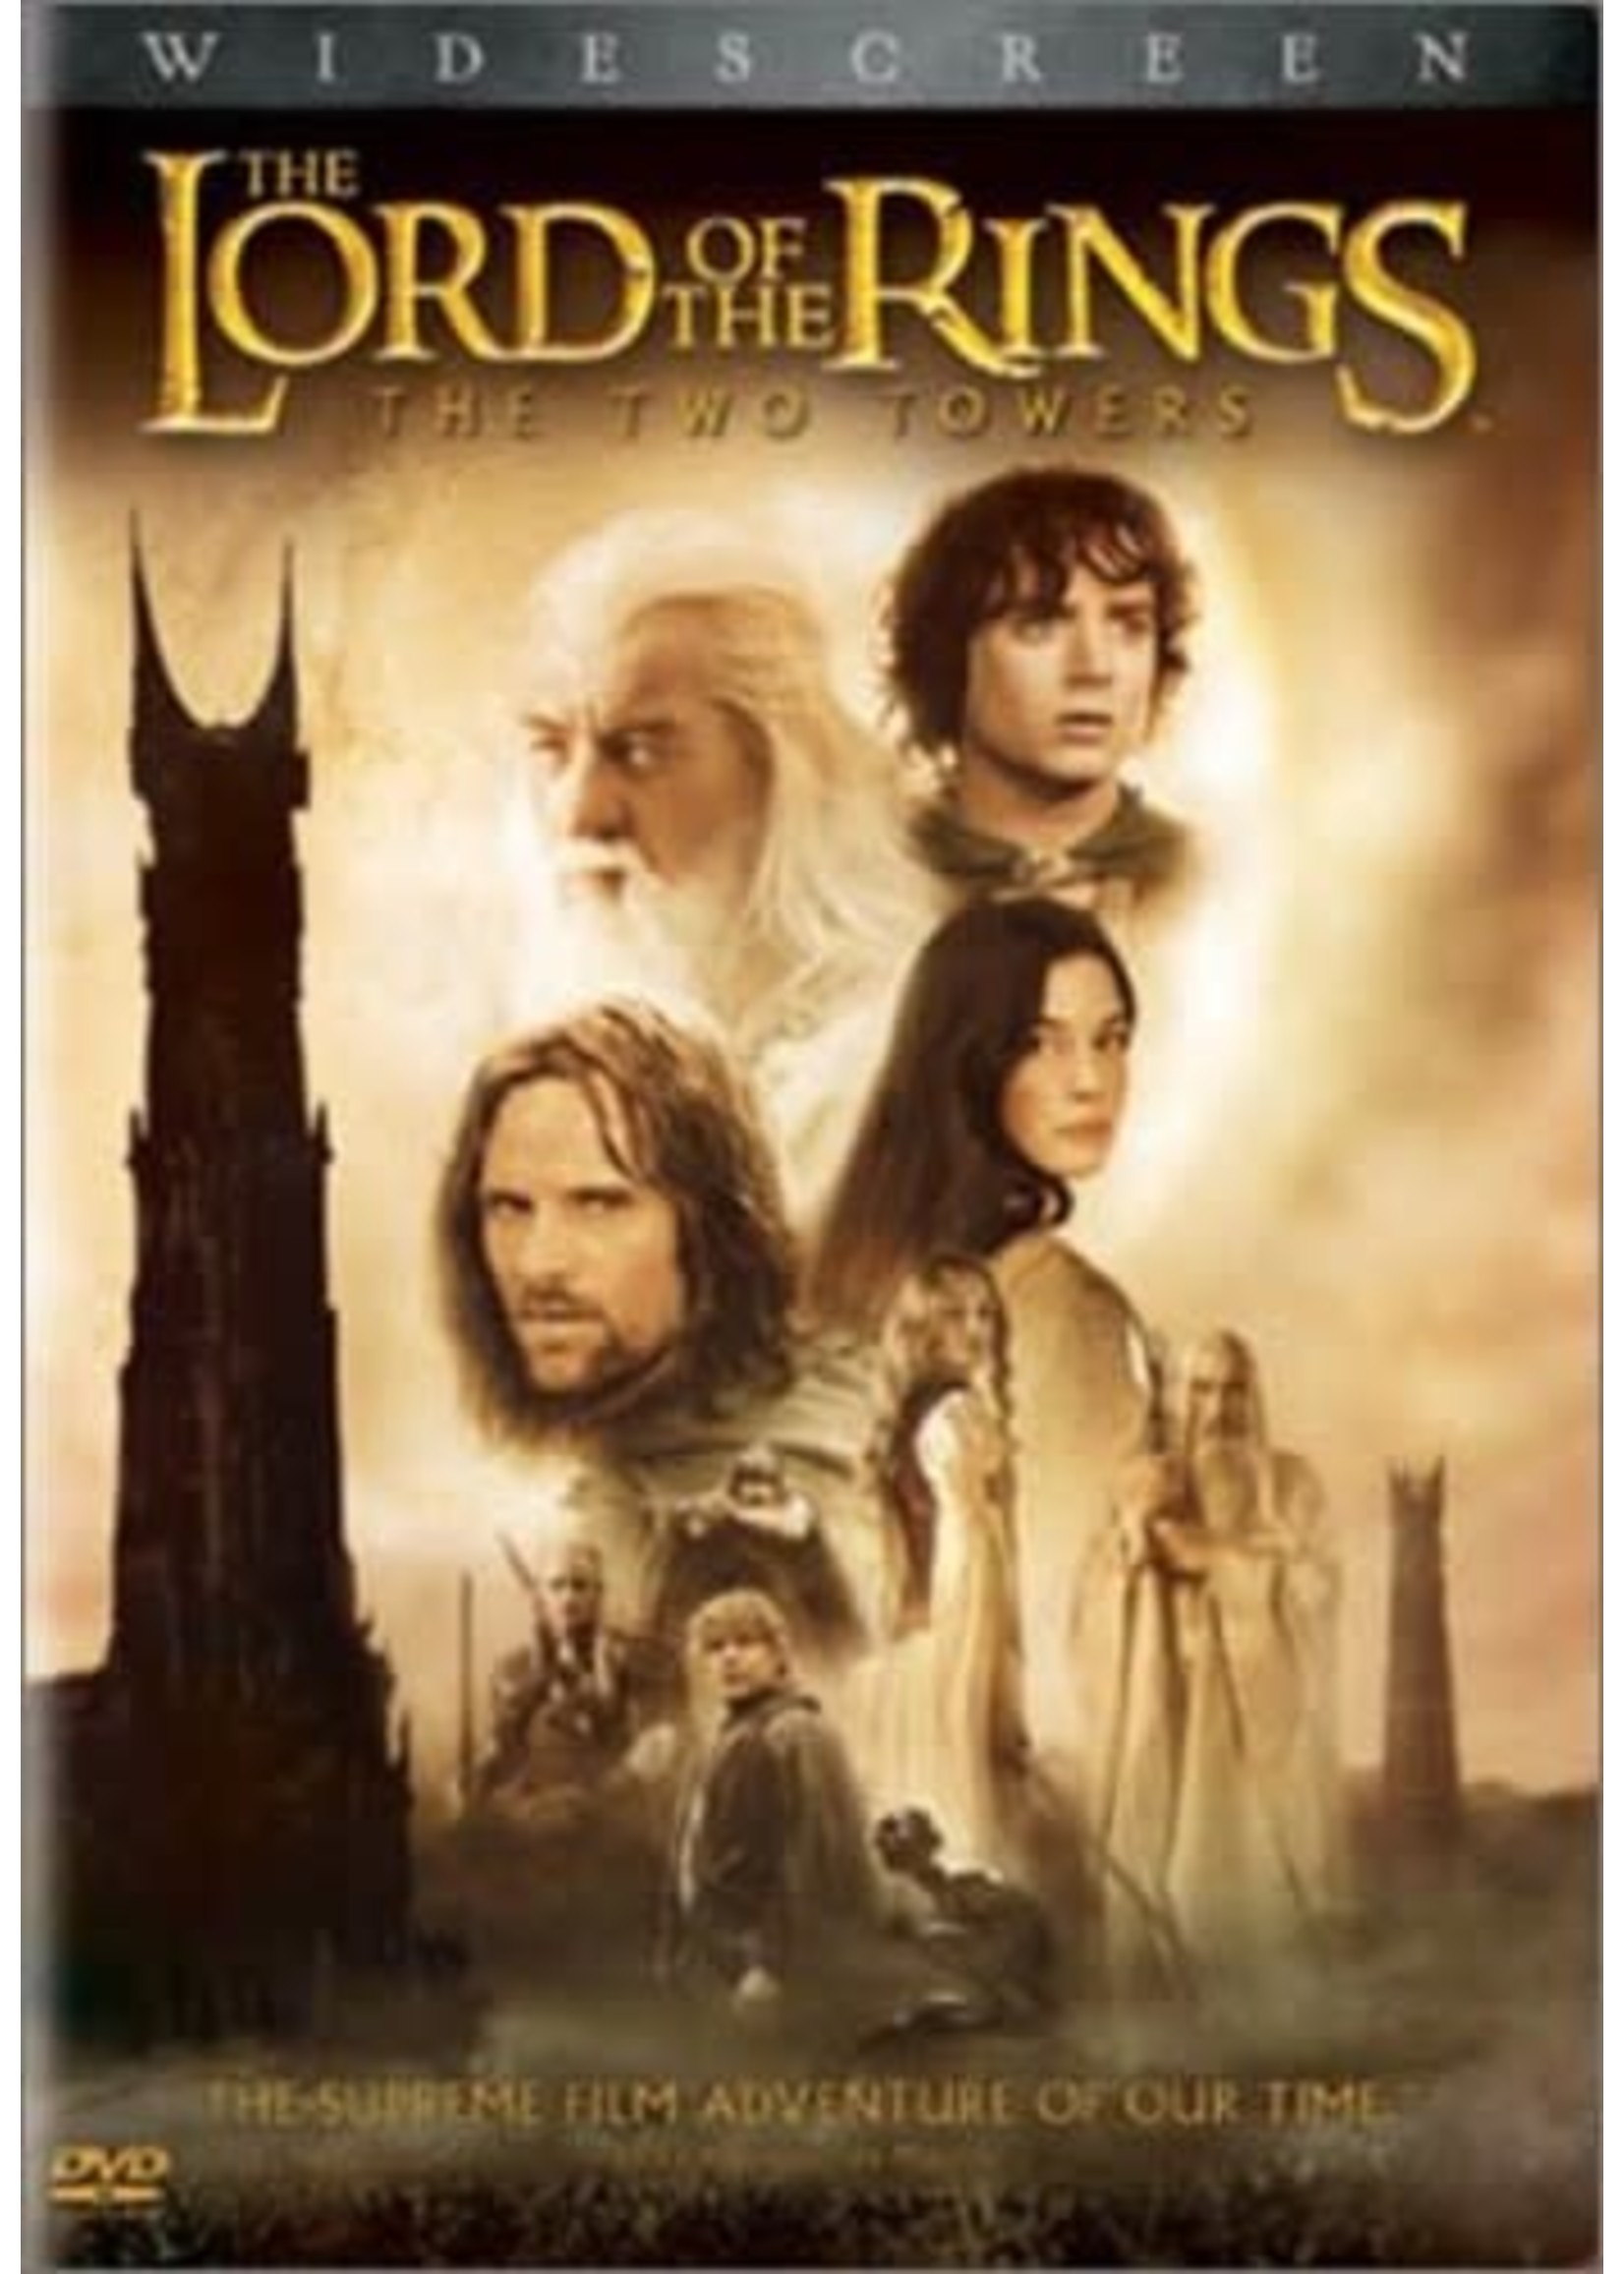 The Lord of the Rings: the Two Towers (DVD)